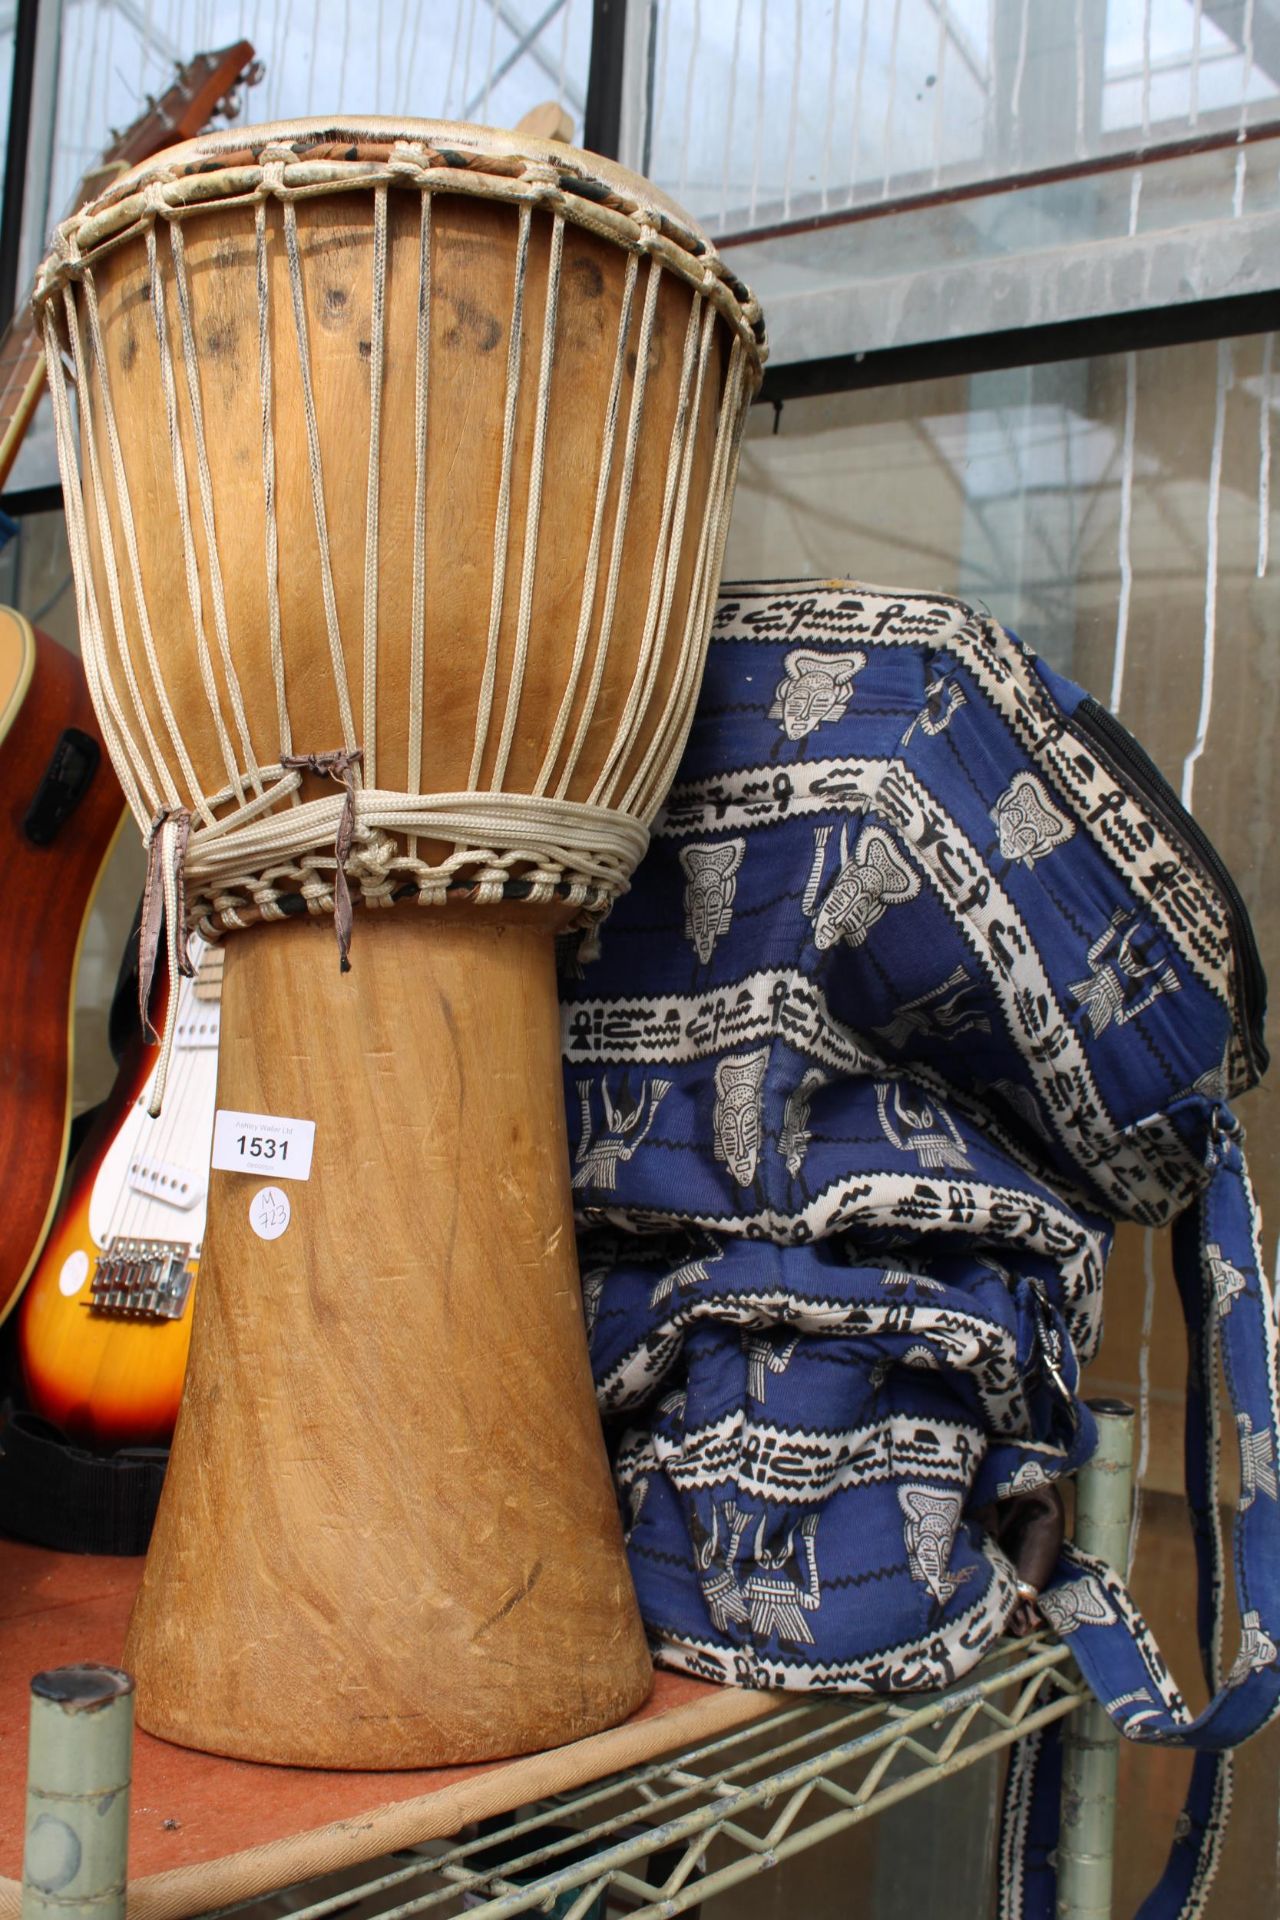 A VINTAGE BONGO DRUM WITH CARRY CASE - Image 2 of 2